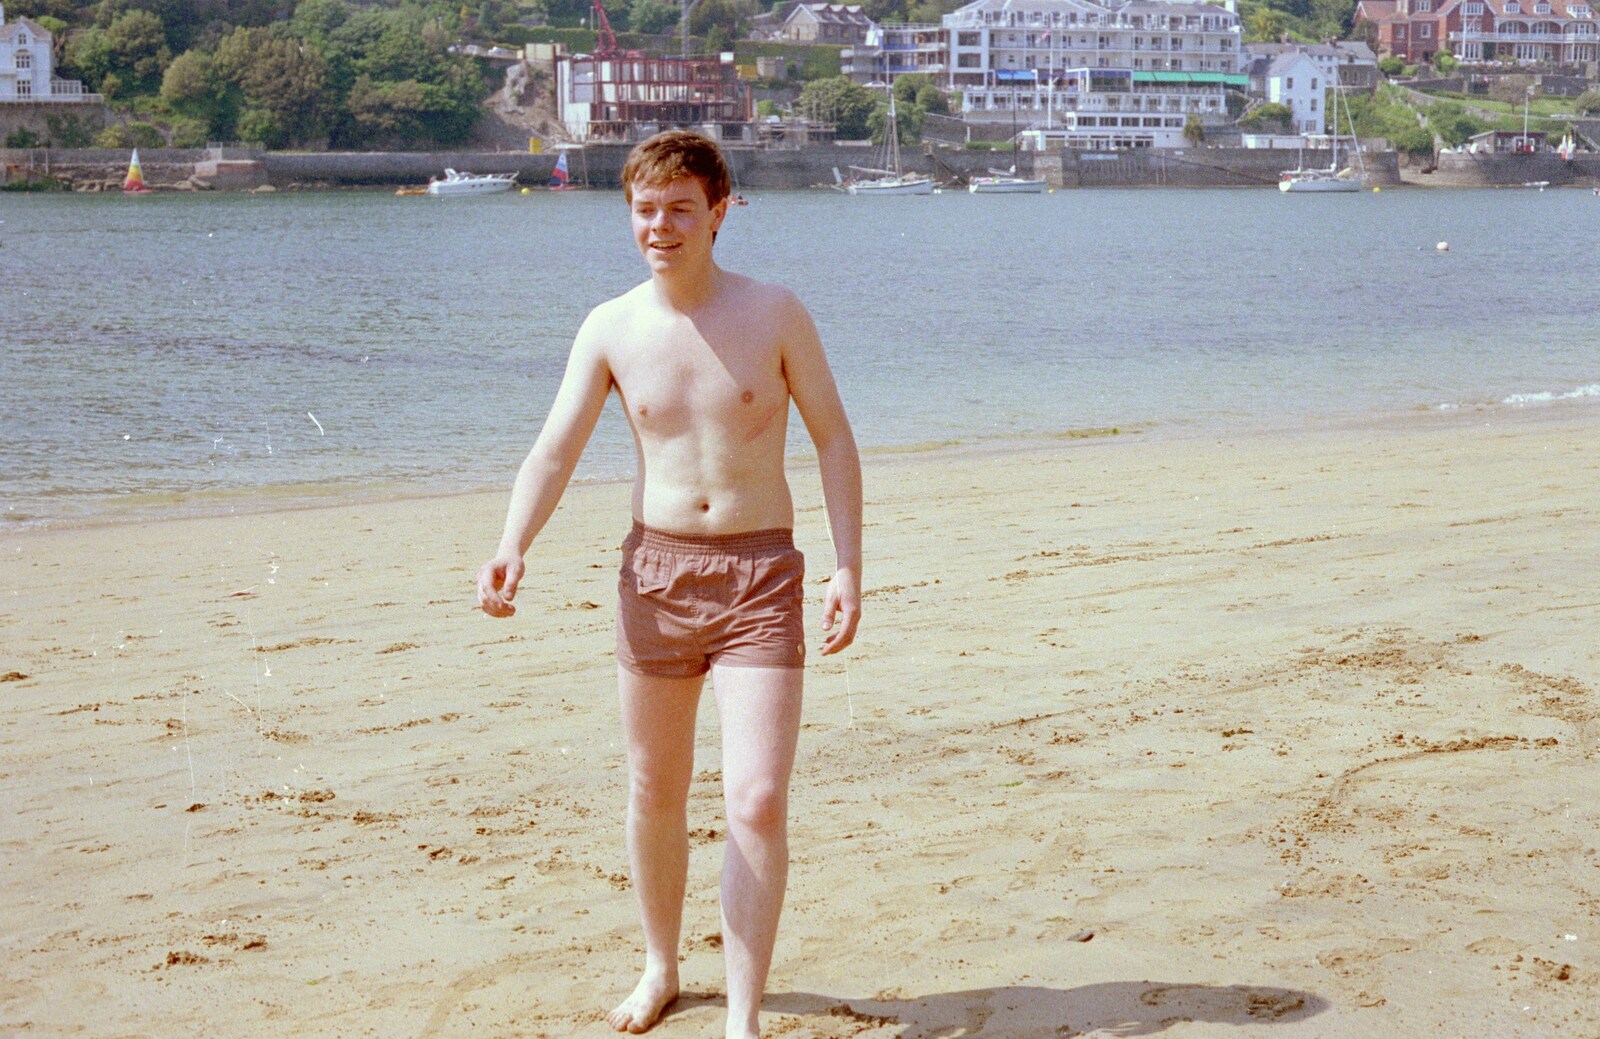 Dave 'the shorts' Lock from Uni: Twenty One Guns and Footie on the Beach, Plymouth Hoe and Salcombe, Devon - 15th June 1986